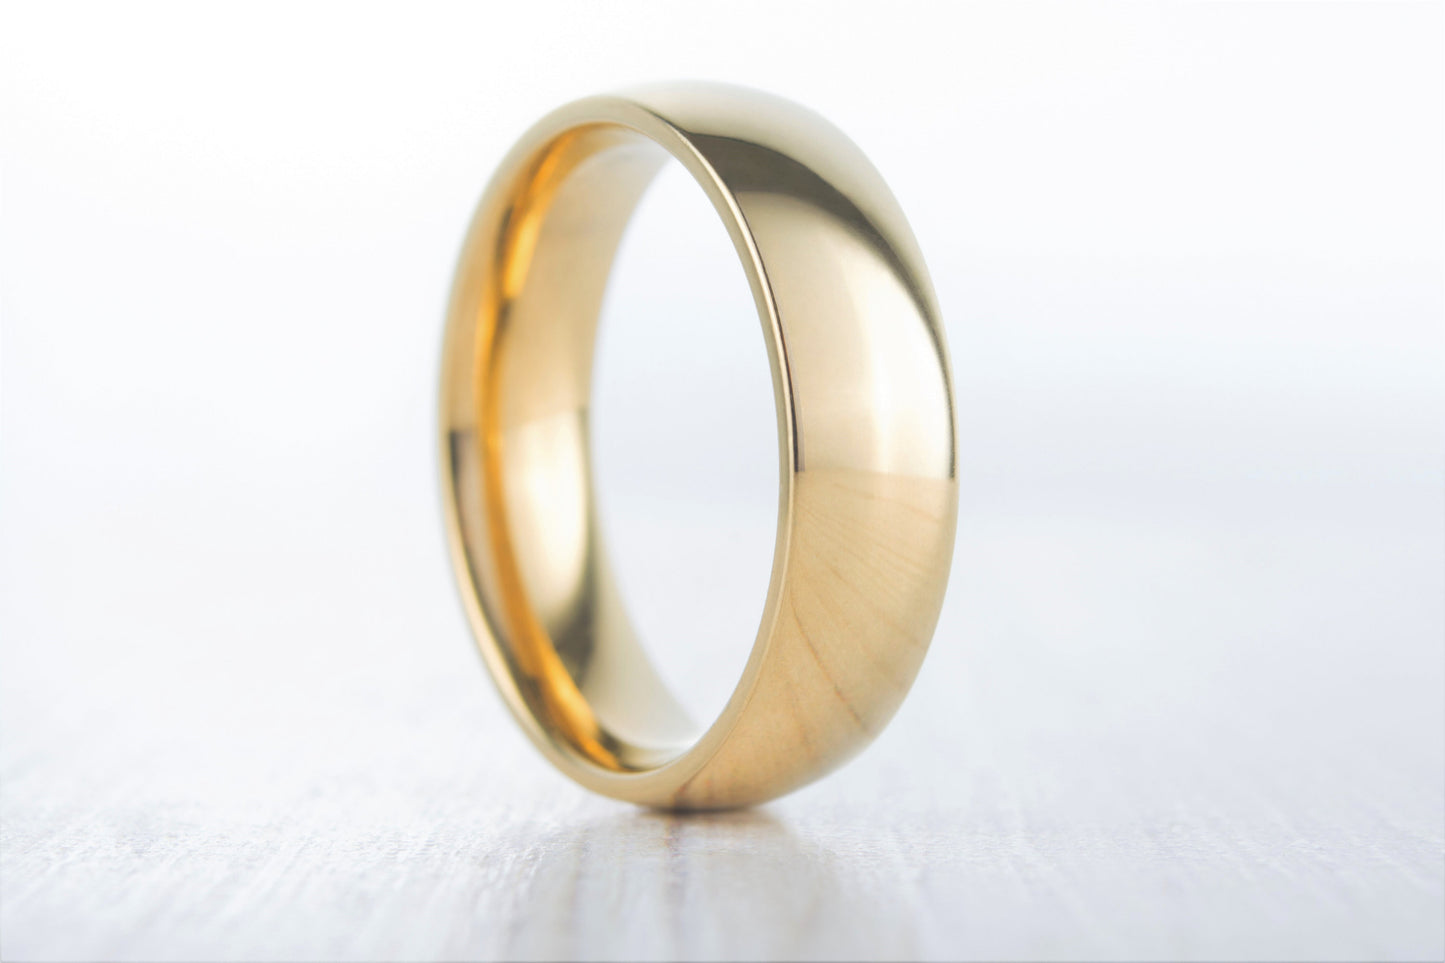 7mm Wide, filled 18ct Yellow gold Plain Wedding band Ring - gold ring